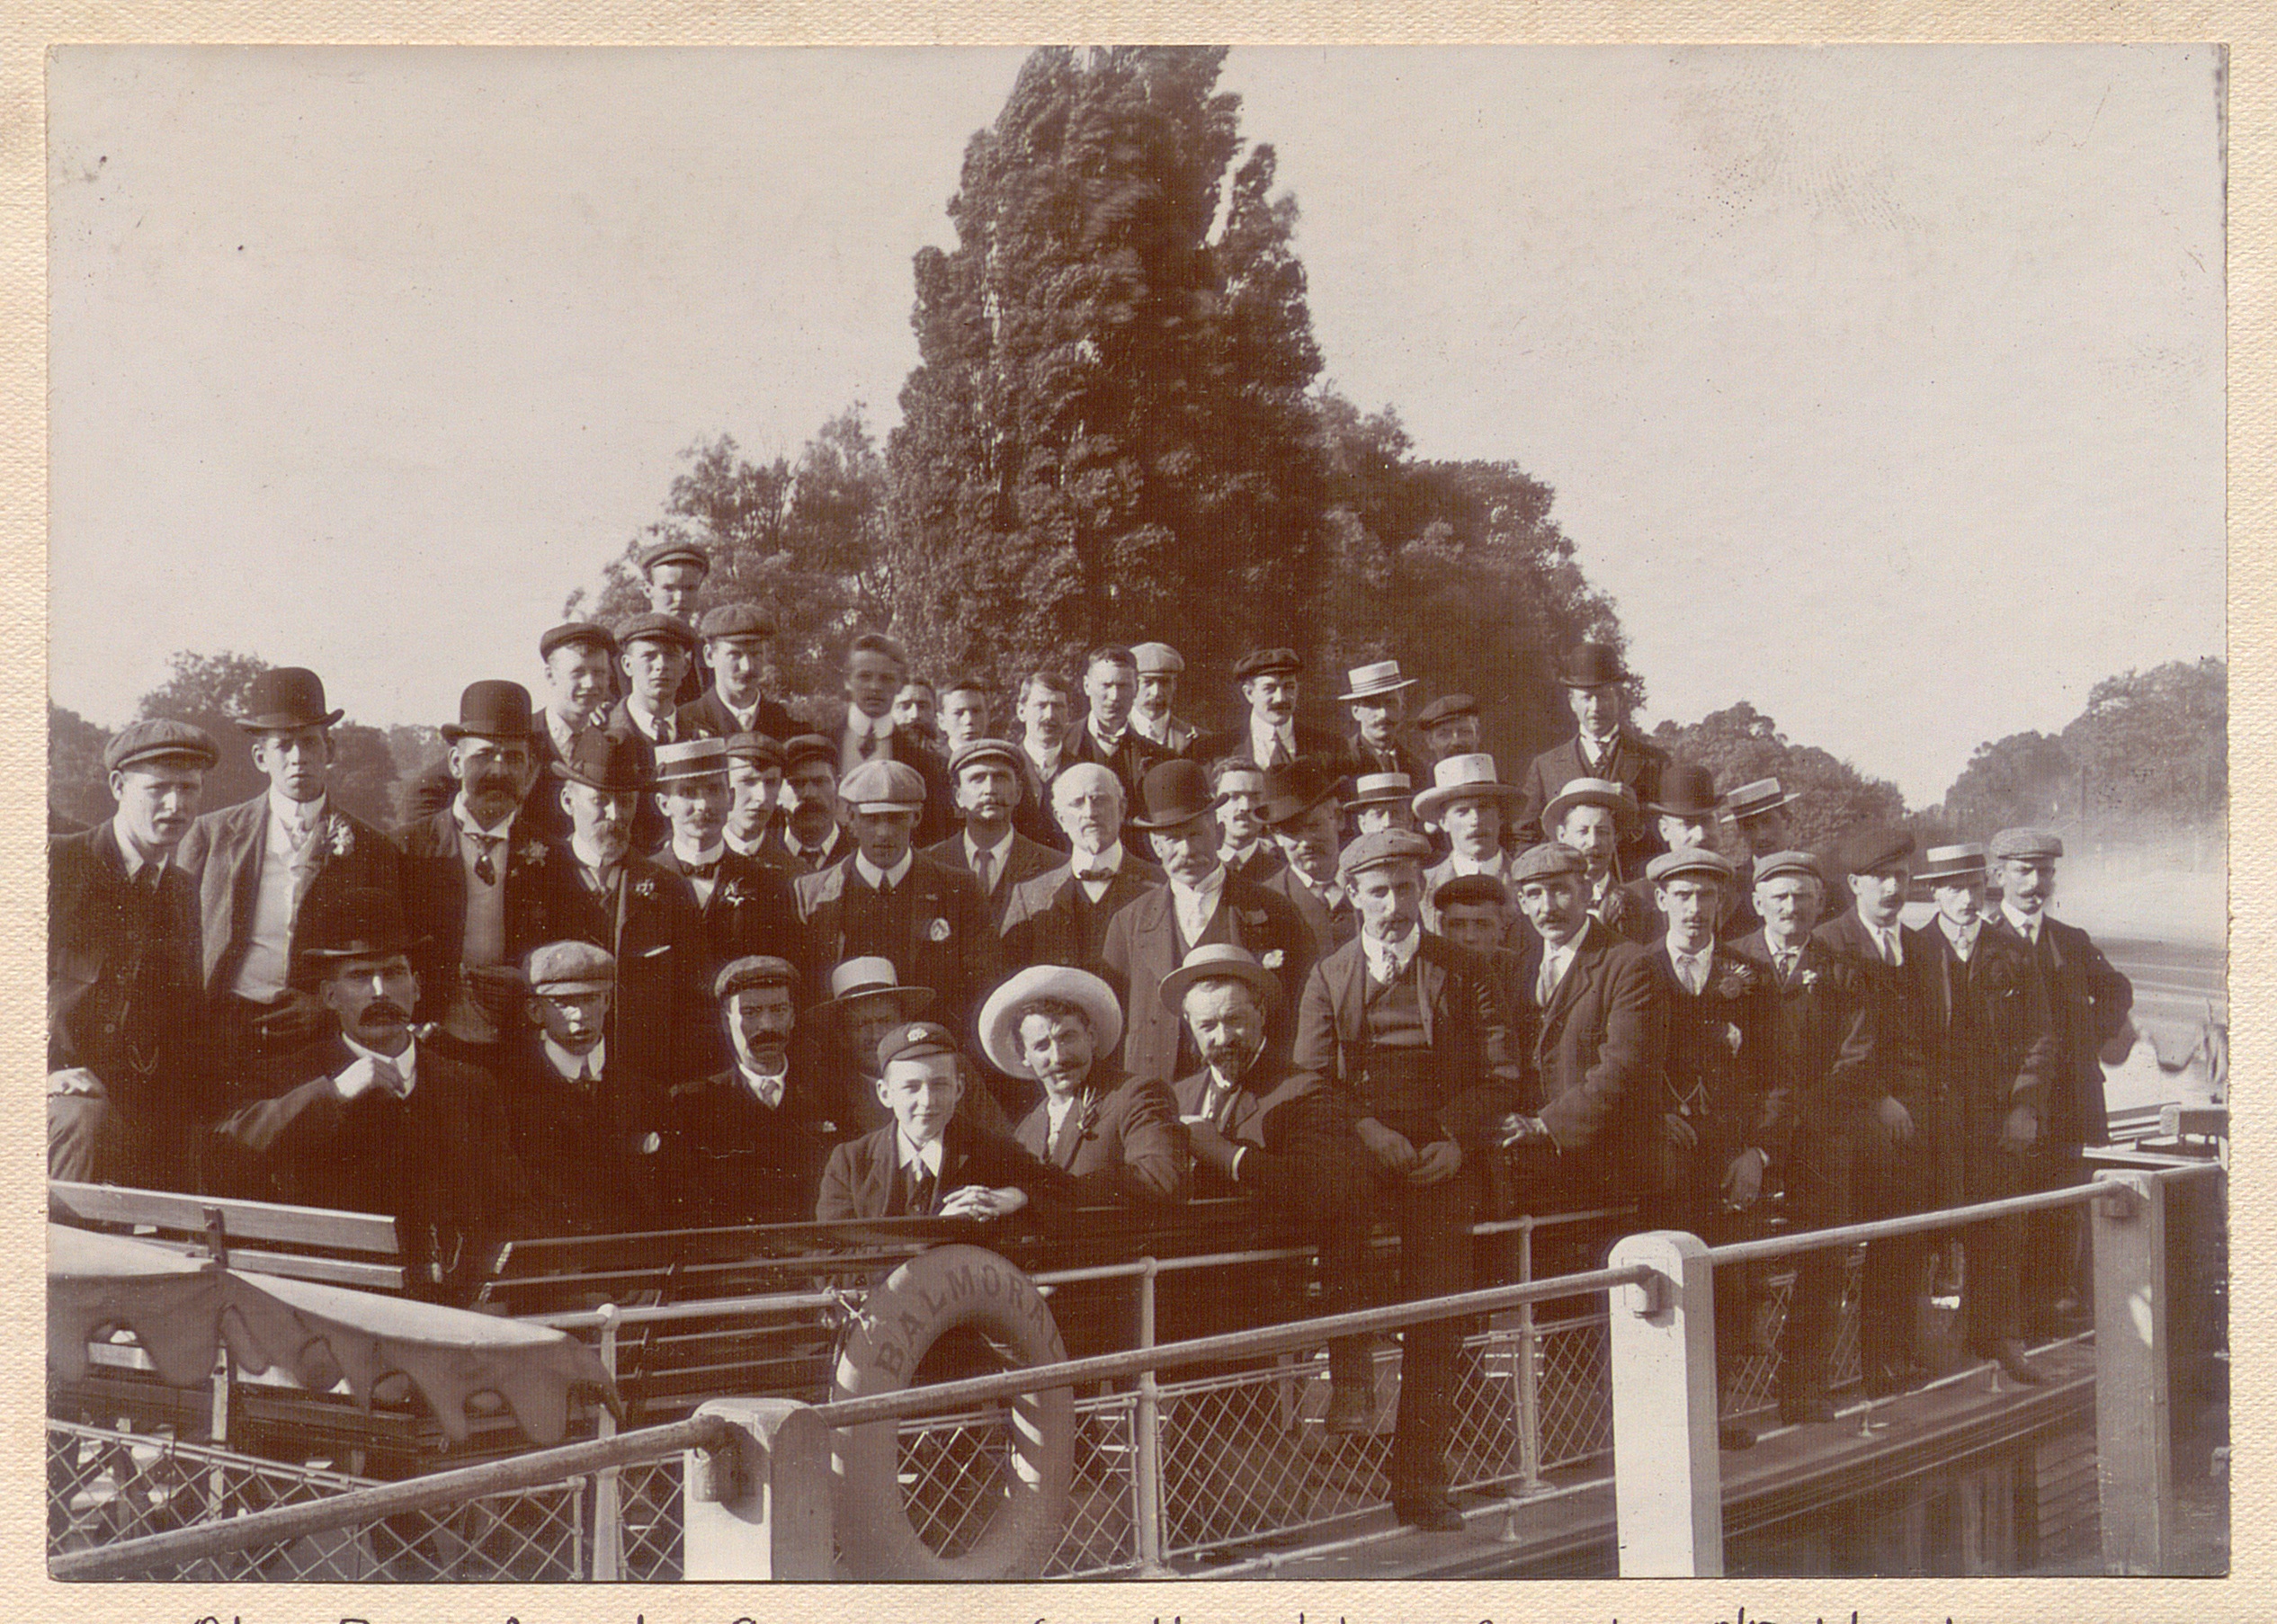 Black and white group photograph of a large number of men, taken outdoors.